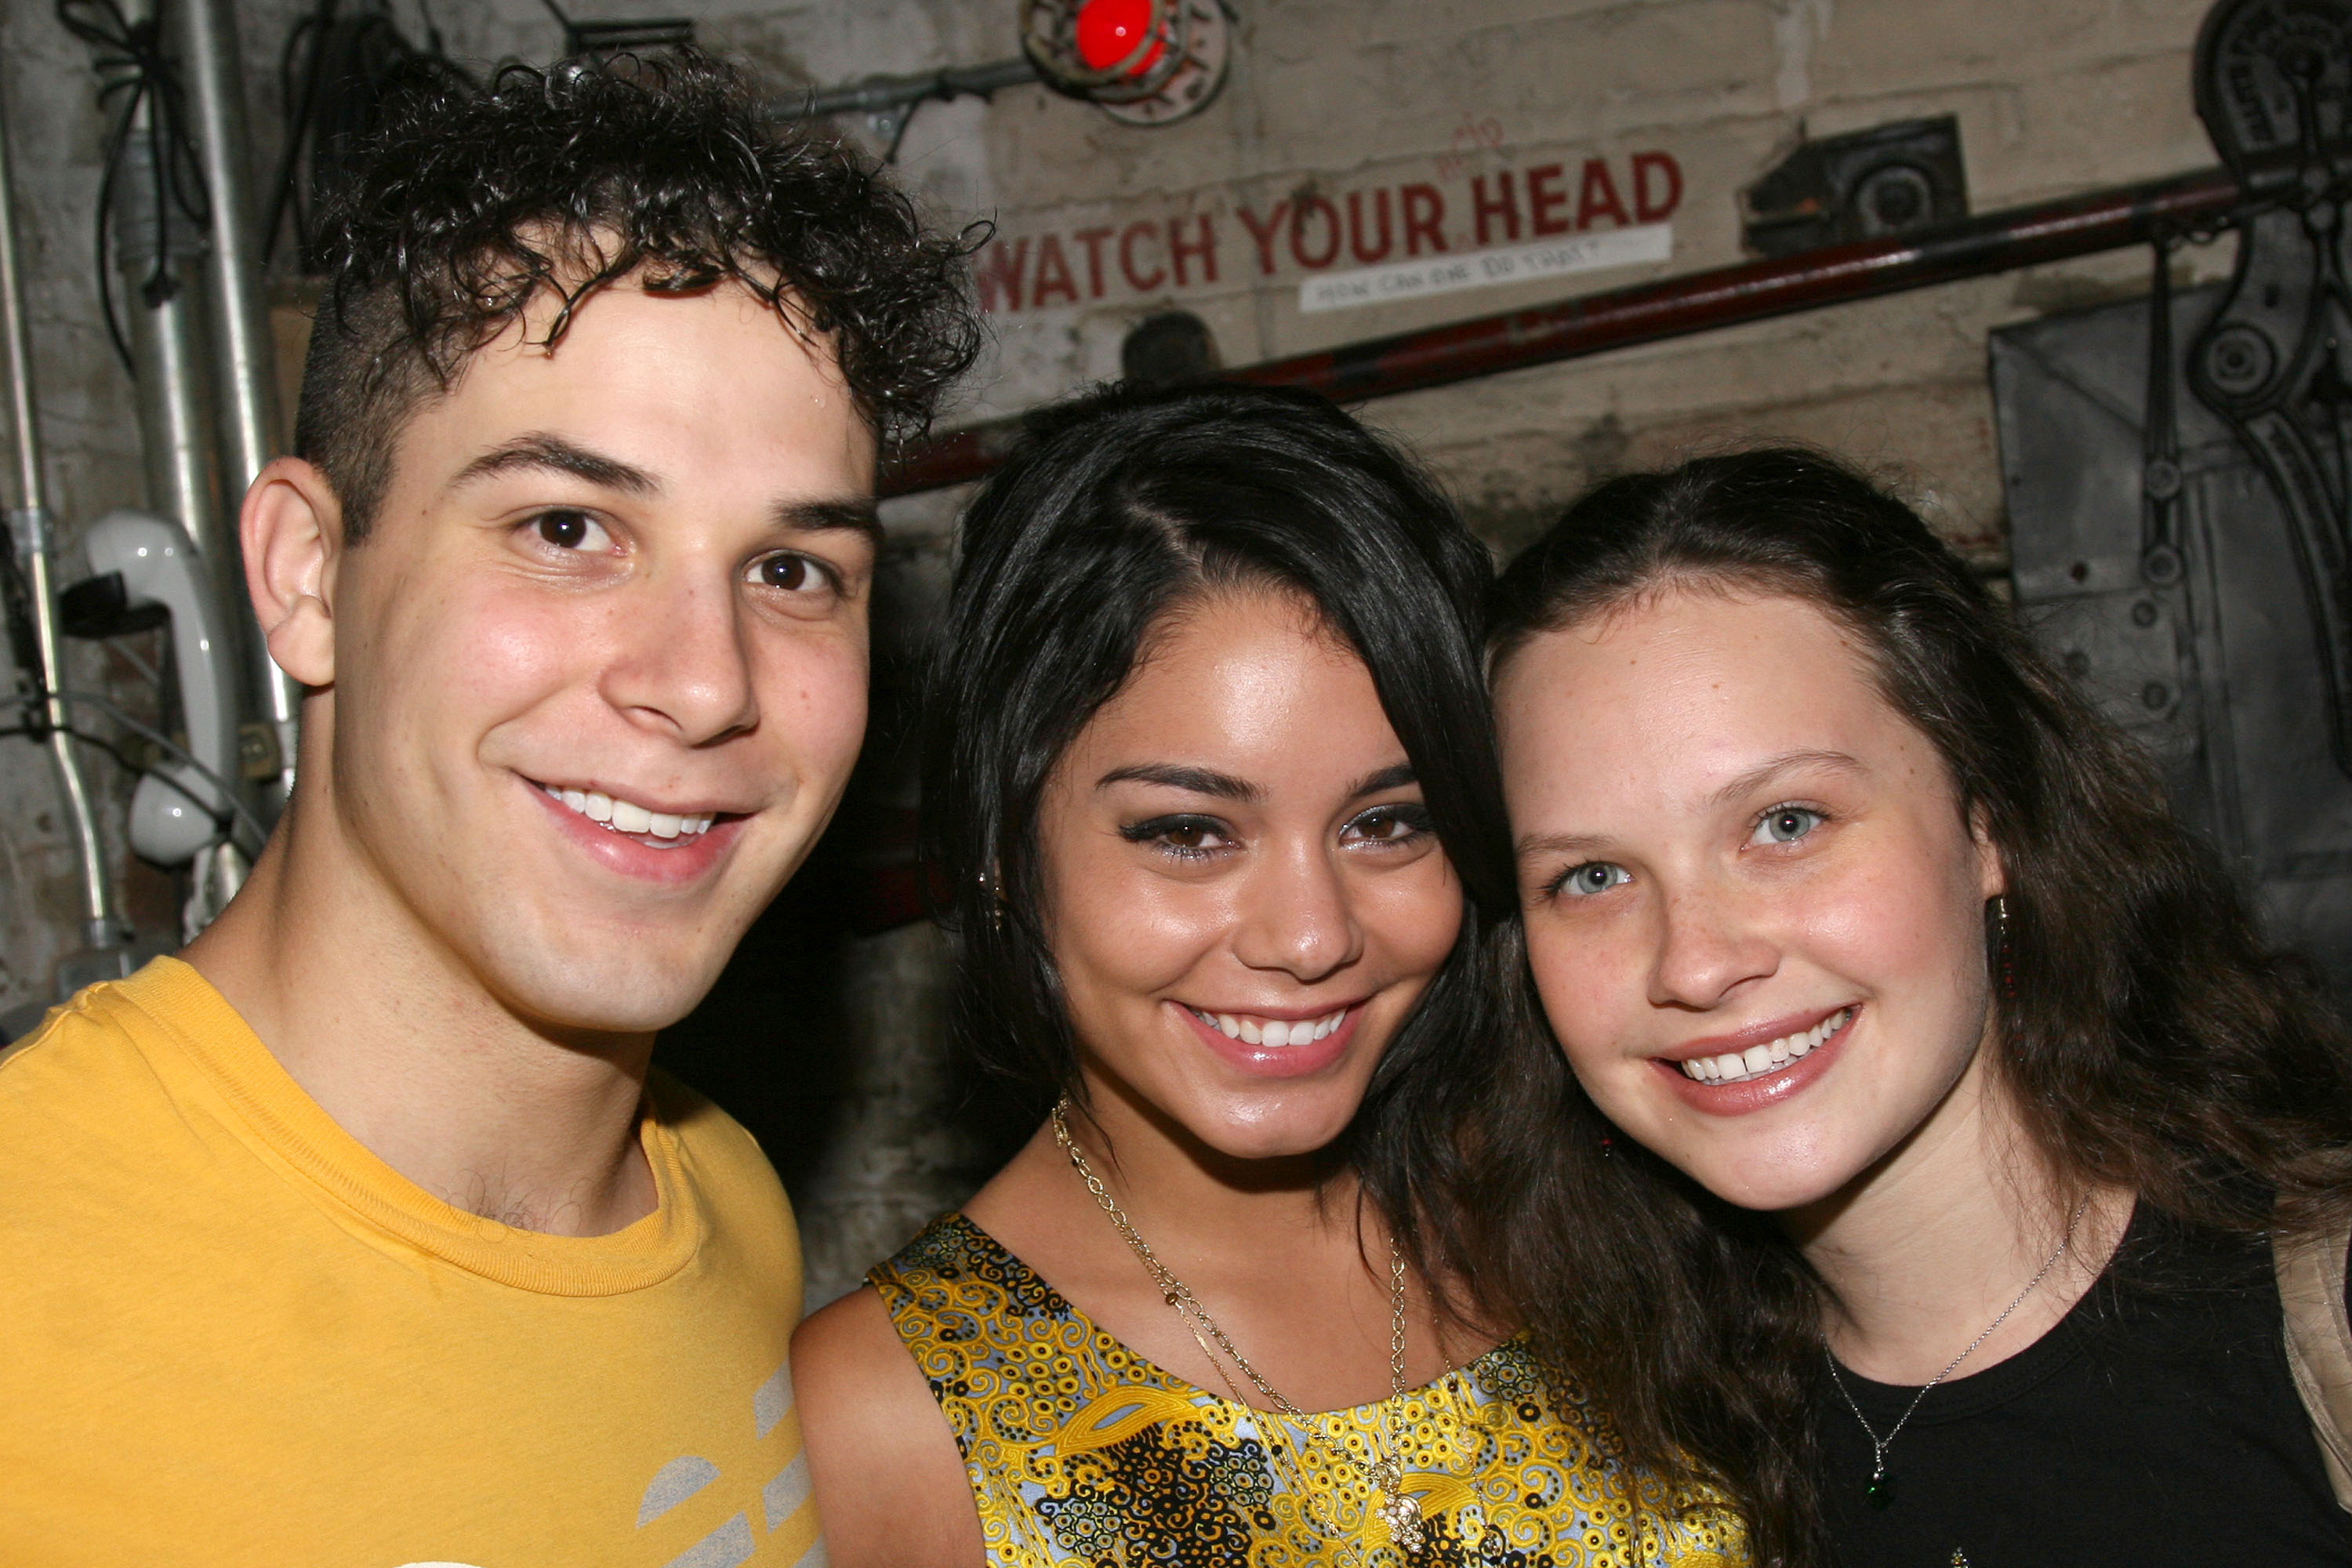 Vanessa Hudgens poses with Skylar Astin (left) and Lauren Pritchard (right) at The Eugene O'Neill Theater on August 17, 2007, in New York City. | Source: Getty Images